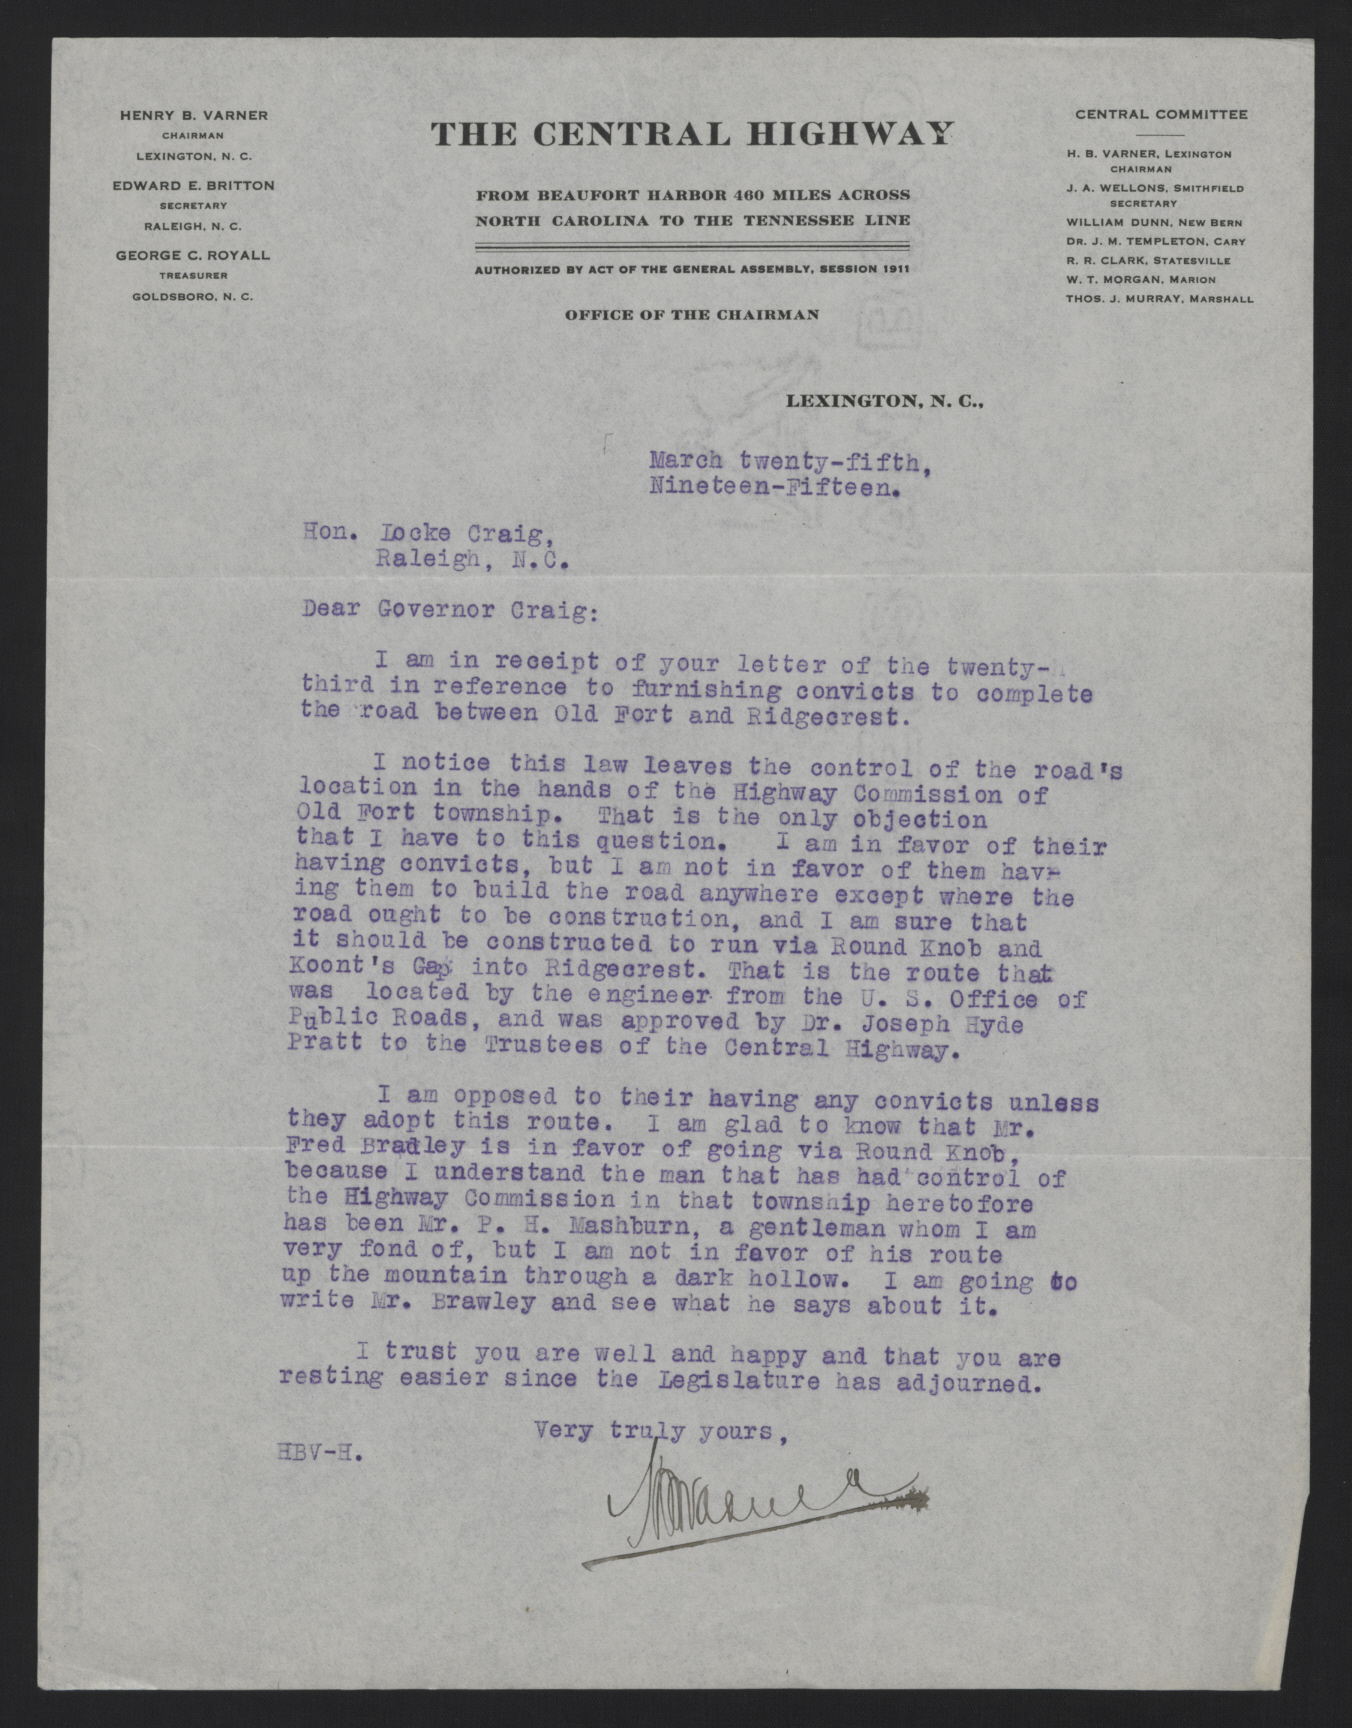 Letter from Varner to Craig, March 25, 1915